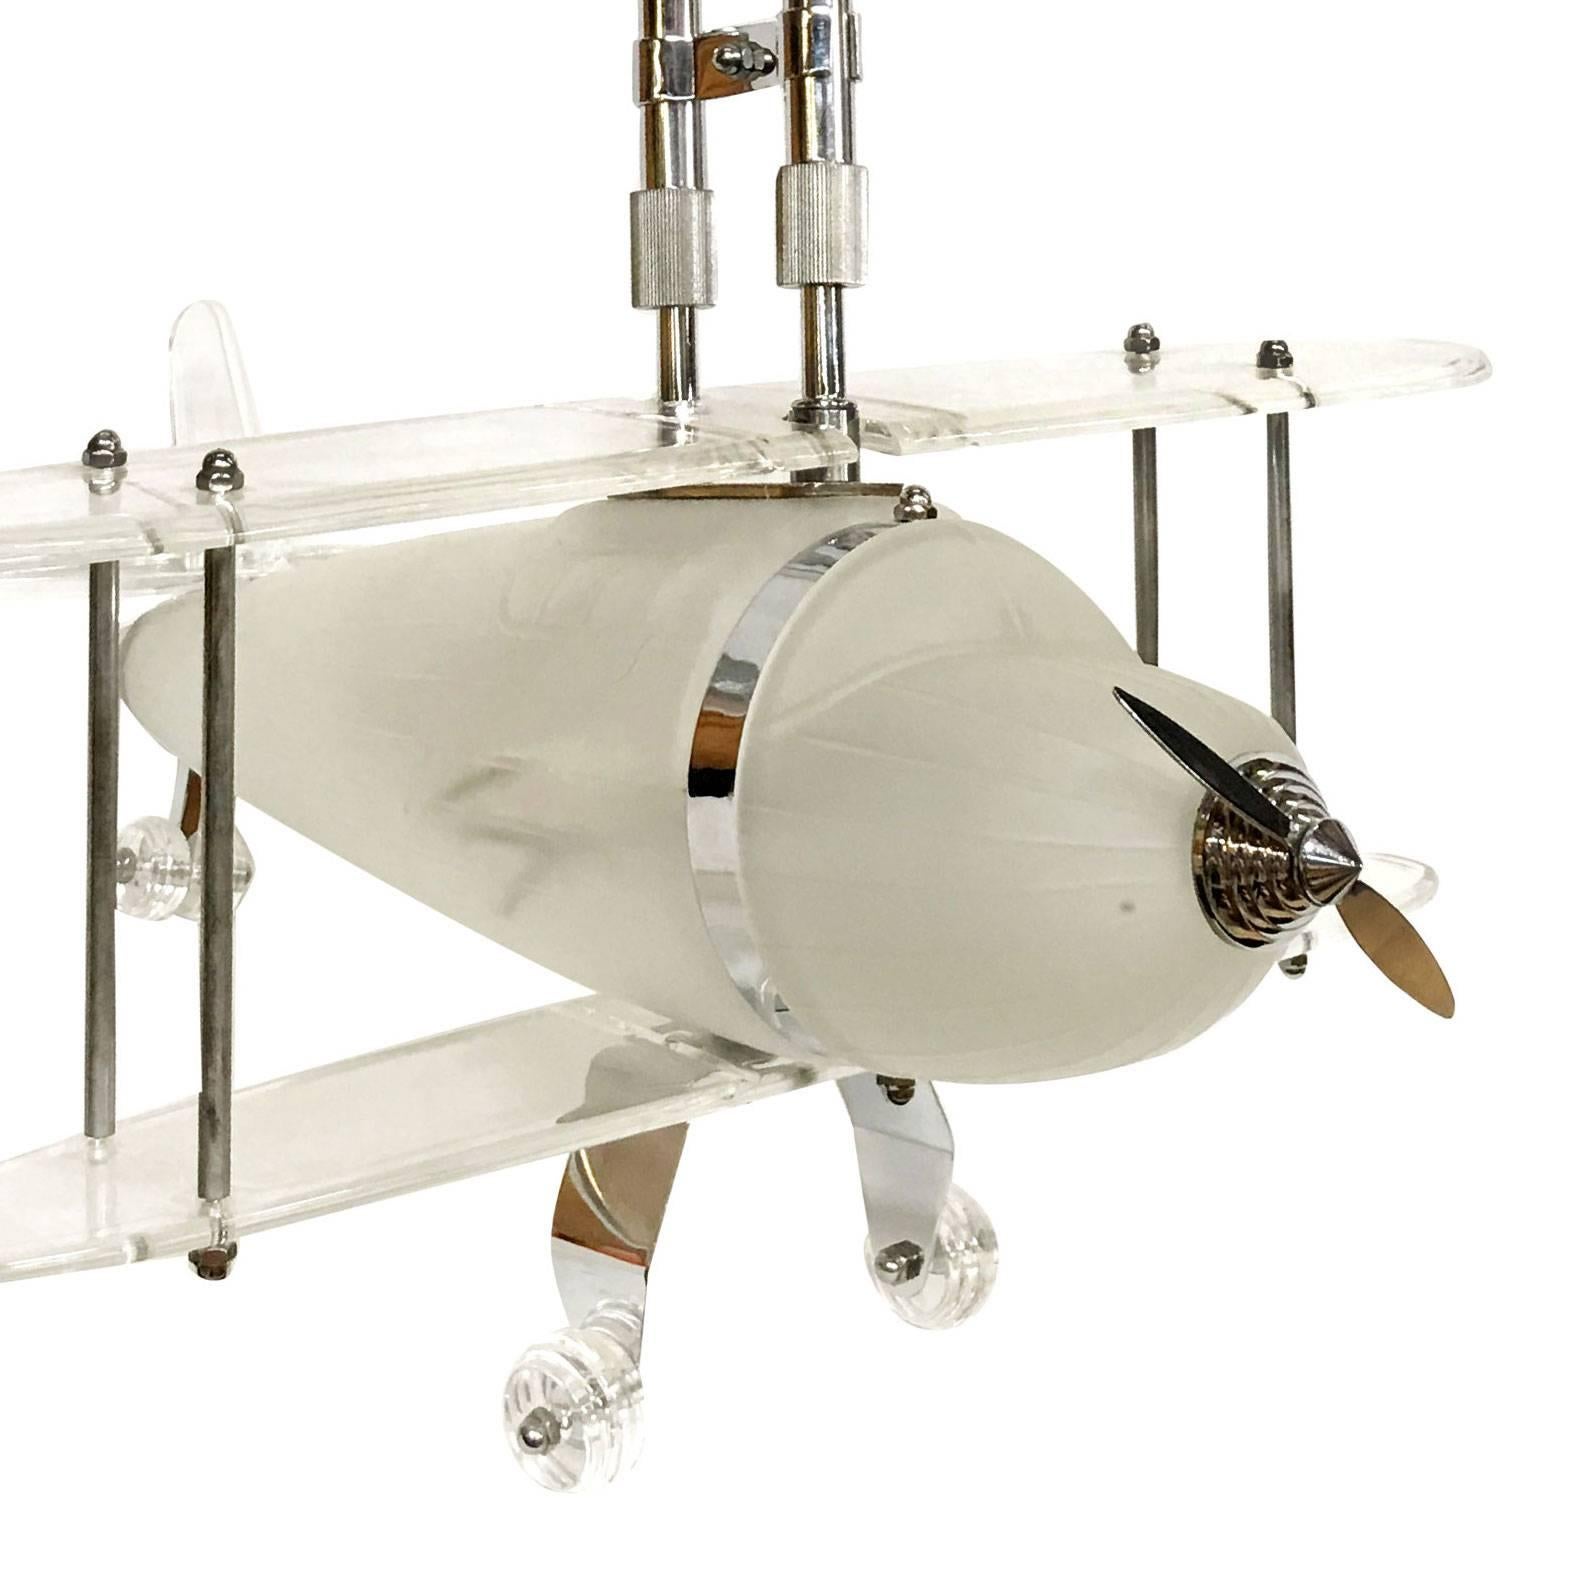 Rare polished chrome and acrylic biplane and airplane ceiling lamp chandelier. The model is constructed of a frosted glass body with acrylic wing and chrome accents aluminum body with an adjustable chrome post.

Measures: The height is just from